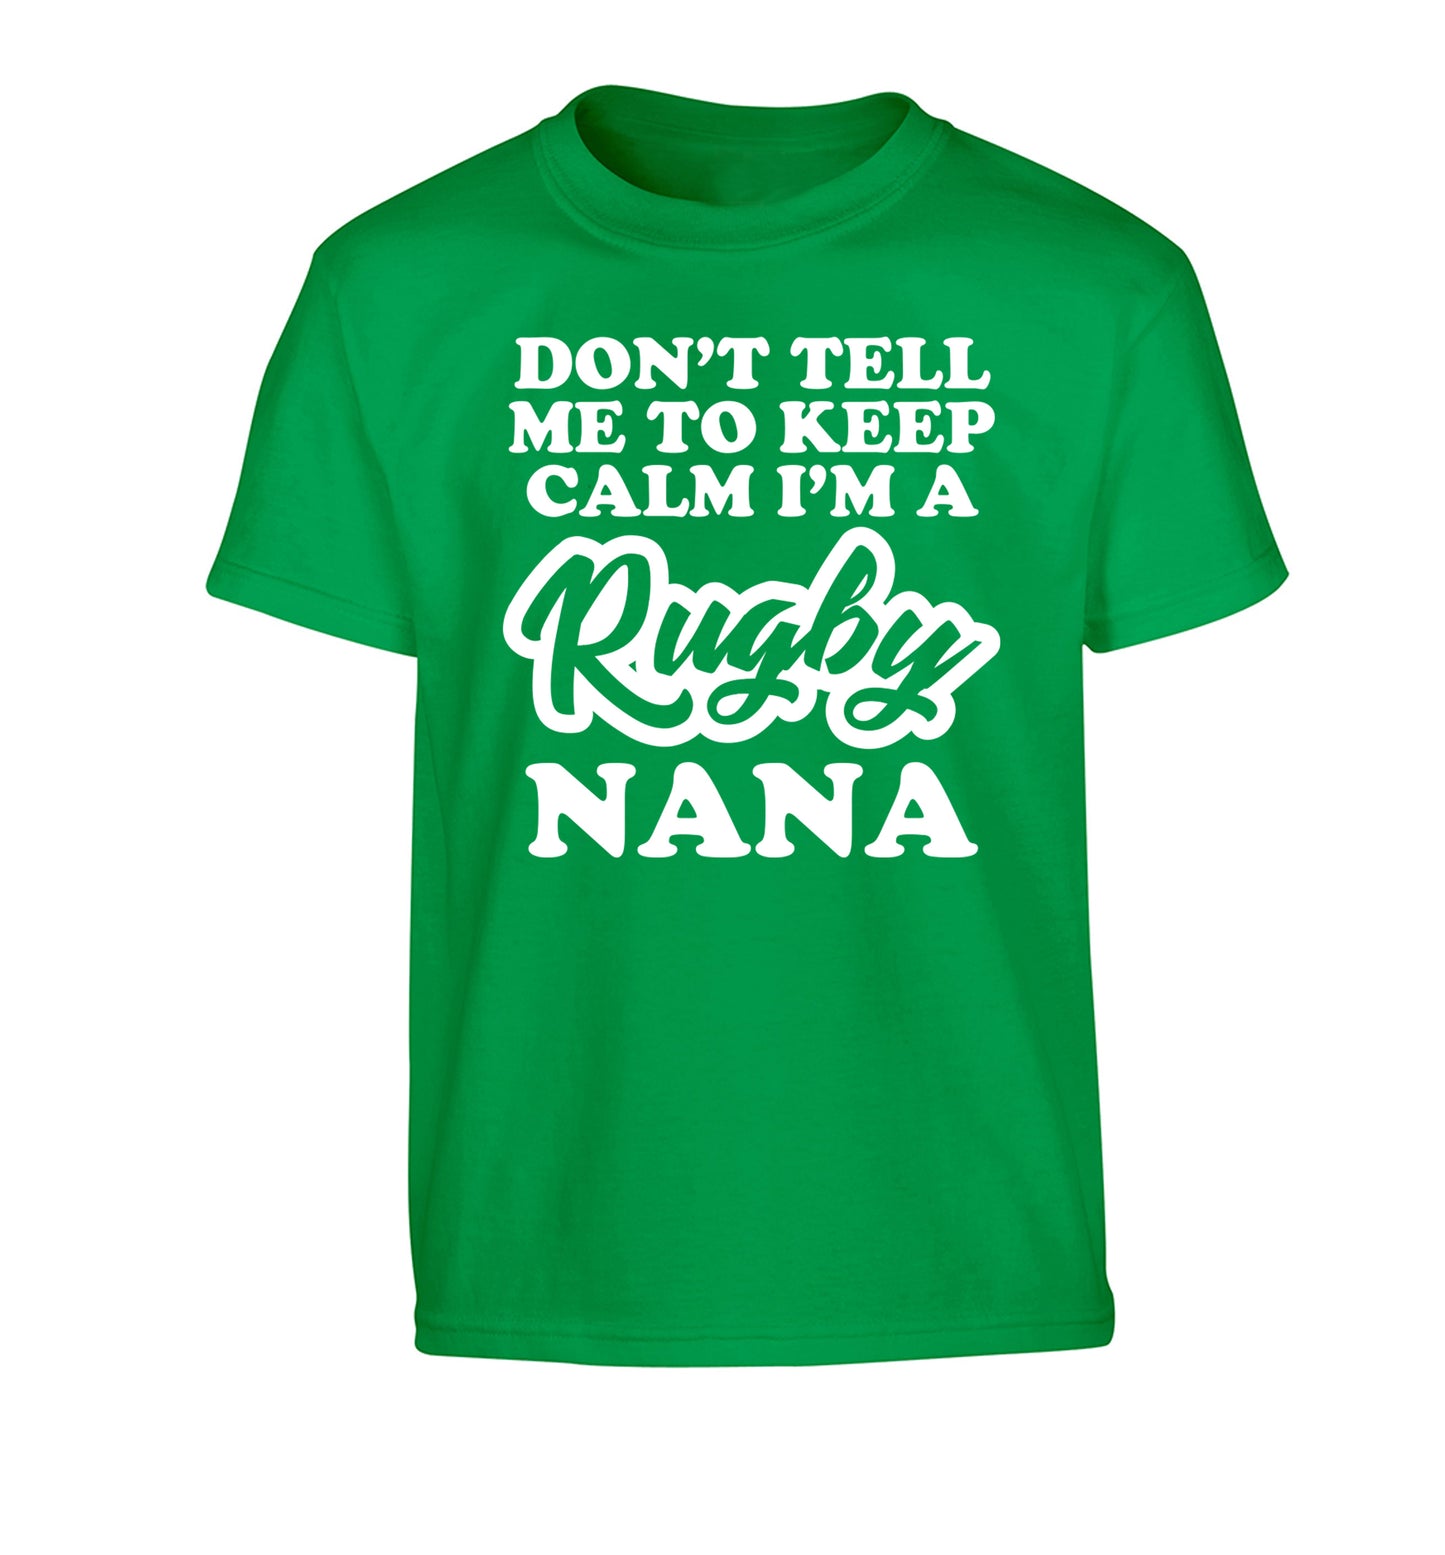 Don't tell me to keep calm I'm a rugby nana Children's green Tshirt 12-13 Years